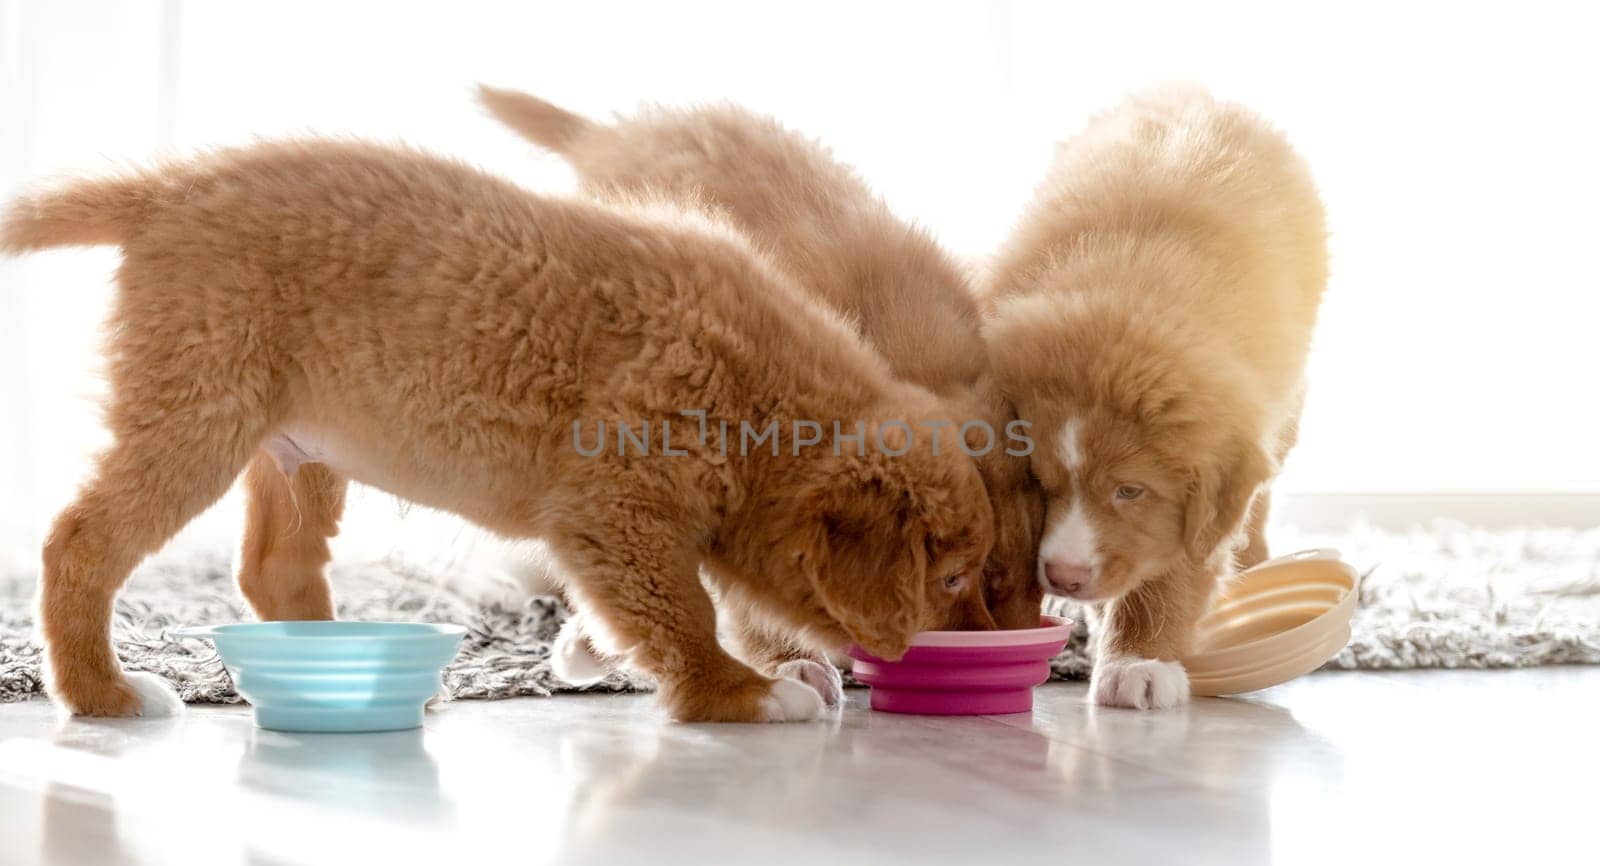 Three Toller Puppies Are Eating Food From One Bowl At Home, A Nova Scotia Duck Tolling Retriever Breed